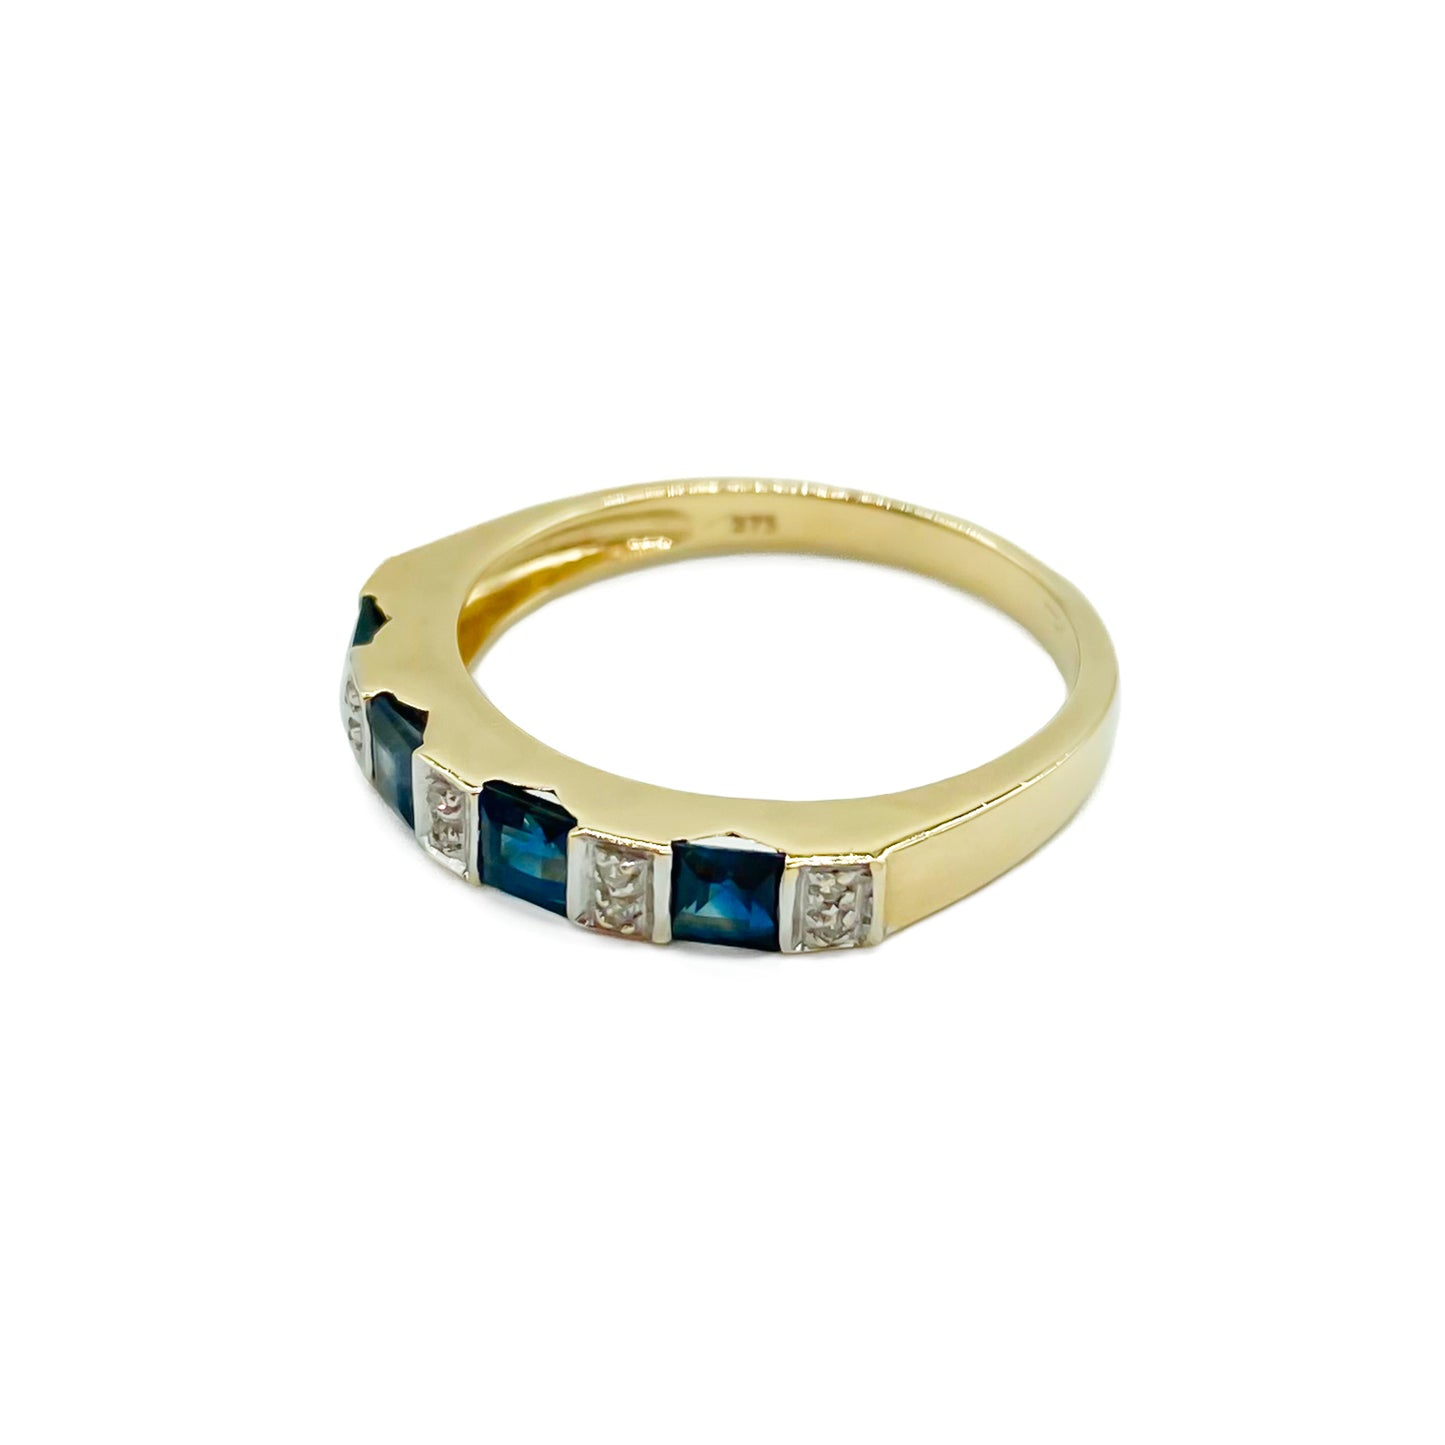 Classic vintage 9ct gold half eternity ring set with ten tiny diamonds and four natural, square sapphires.&nbsp;